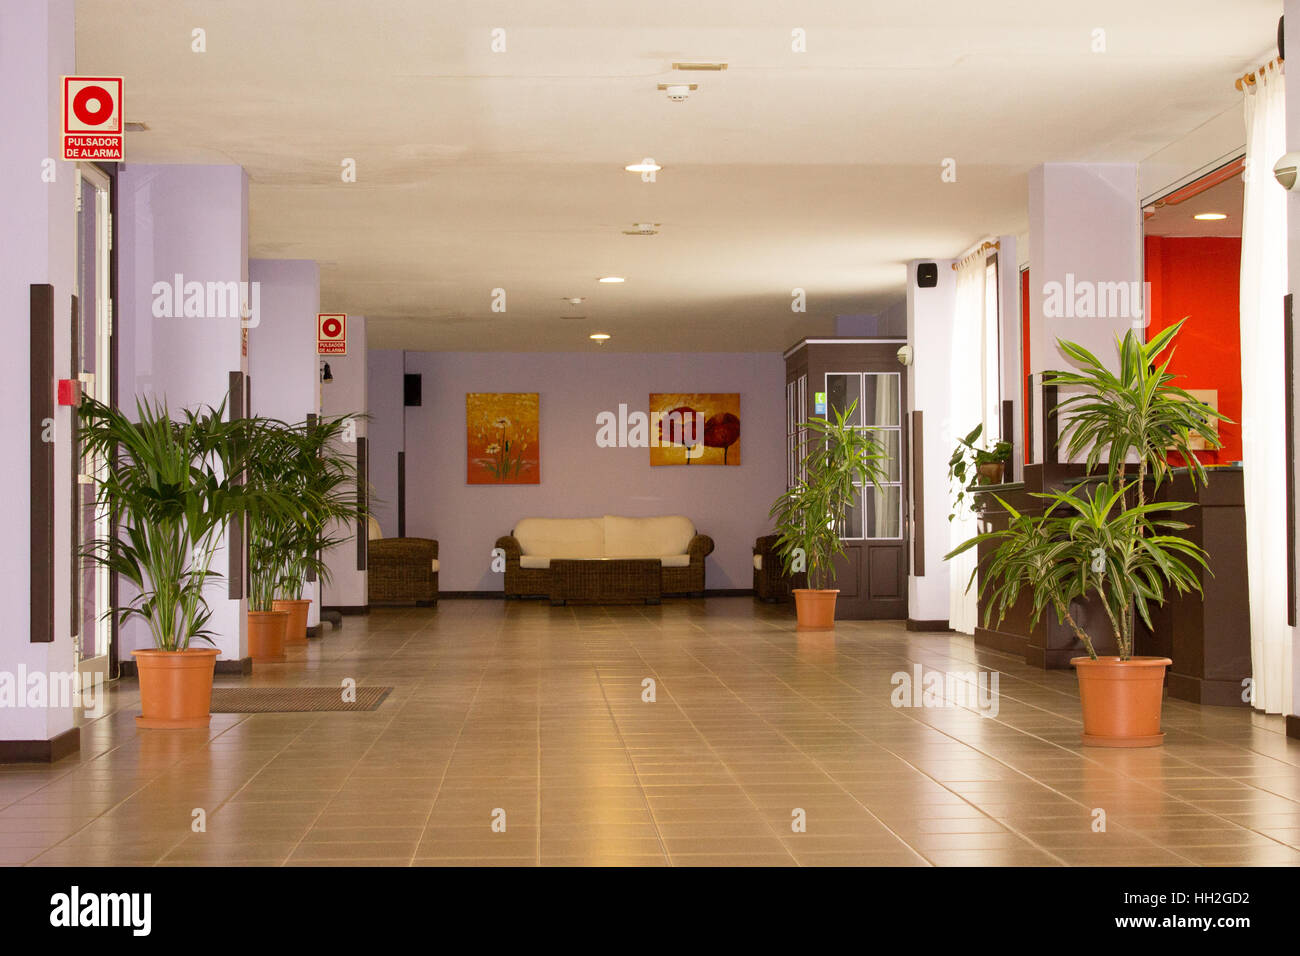 The front entrance and waiting area of Apartmentos Centro Cancajos. A hotel apartment in Las Palma, Canary Islands, Spain. Stock Photo